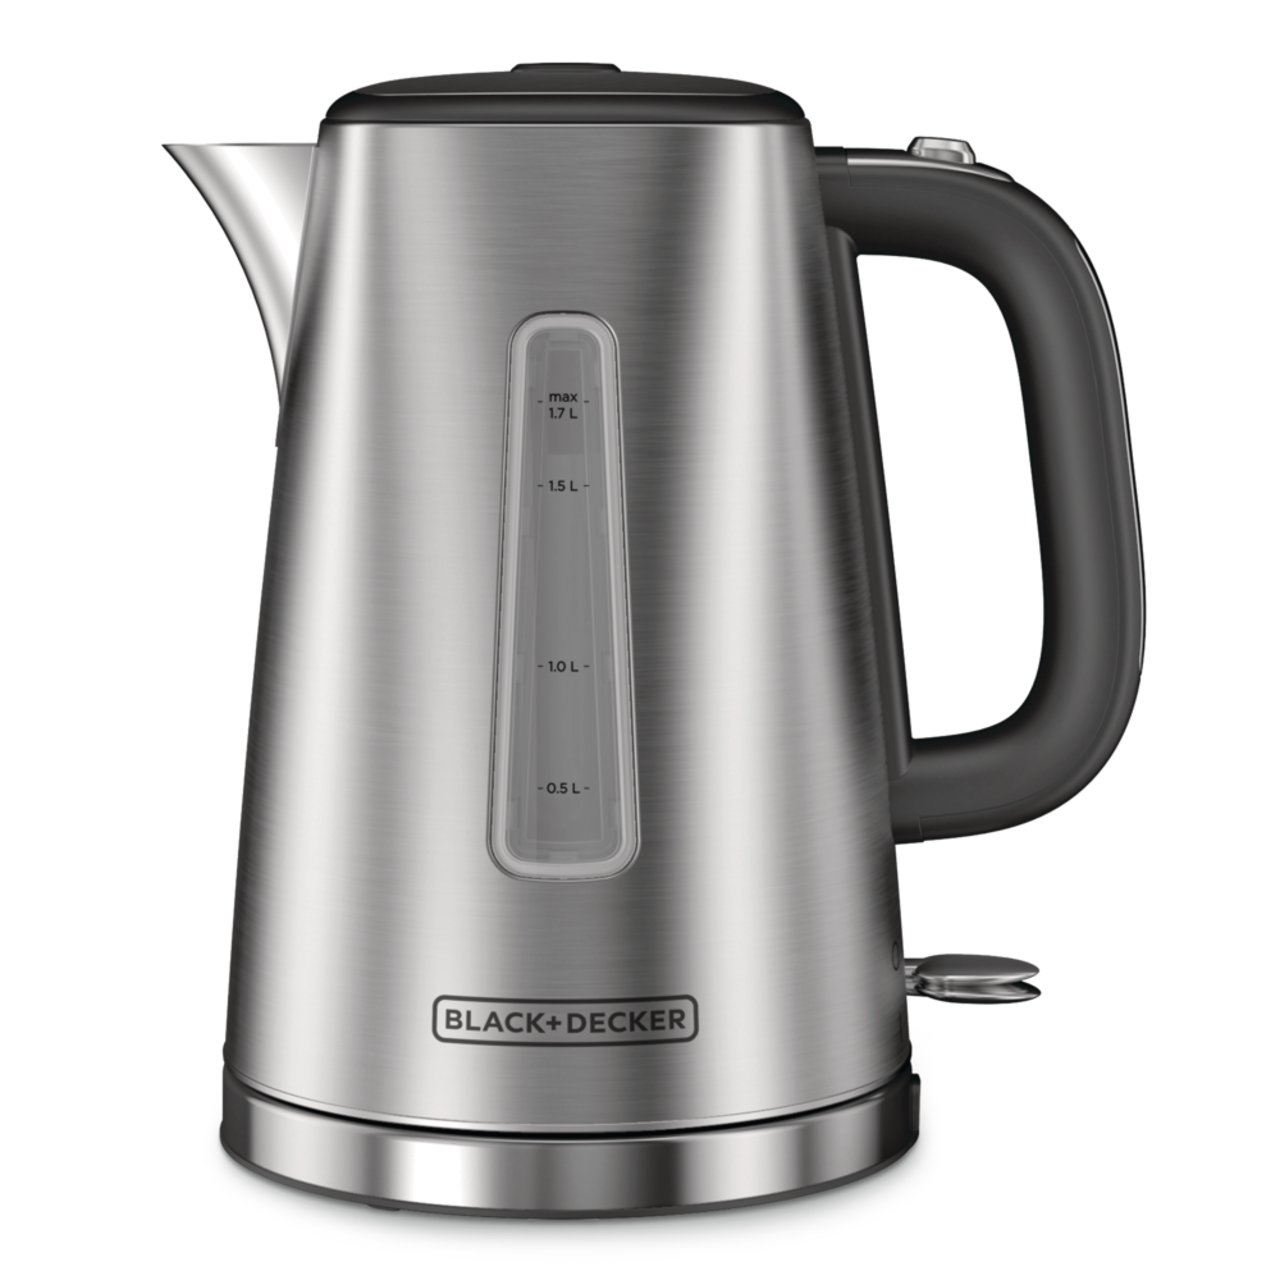 https://media-www.canadiantire.ca/product/living/kitchen/kitchen-appliances/0431370/black-decker-kitchen-tools-1-7l-kettle-531e3aff-e627-4214-bb45-dec0a3c68581.png?imdensity=1&imwidth=640&impolicy=mZoom